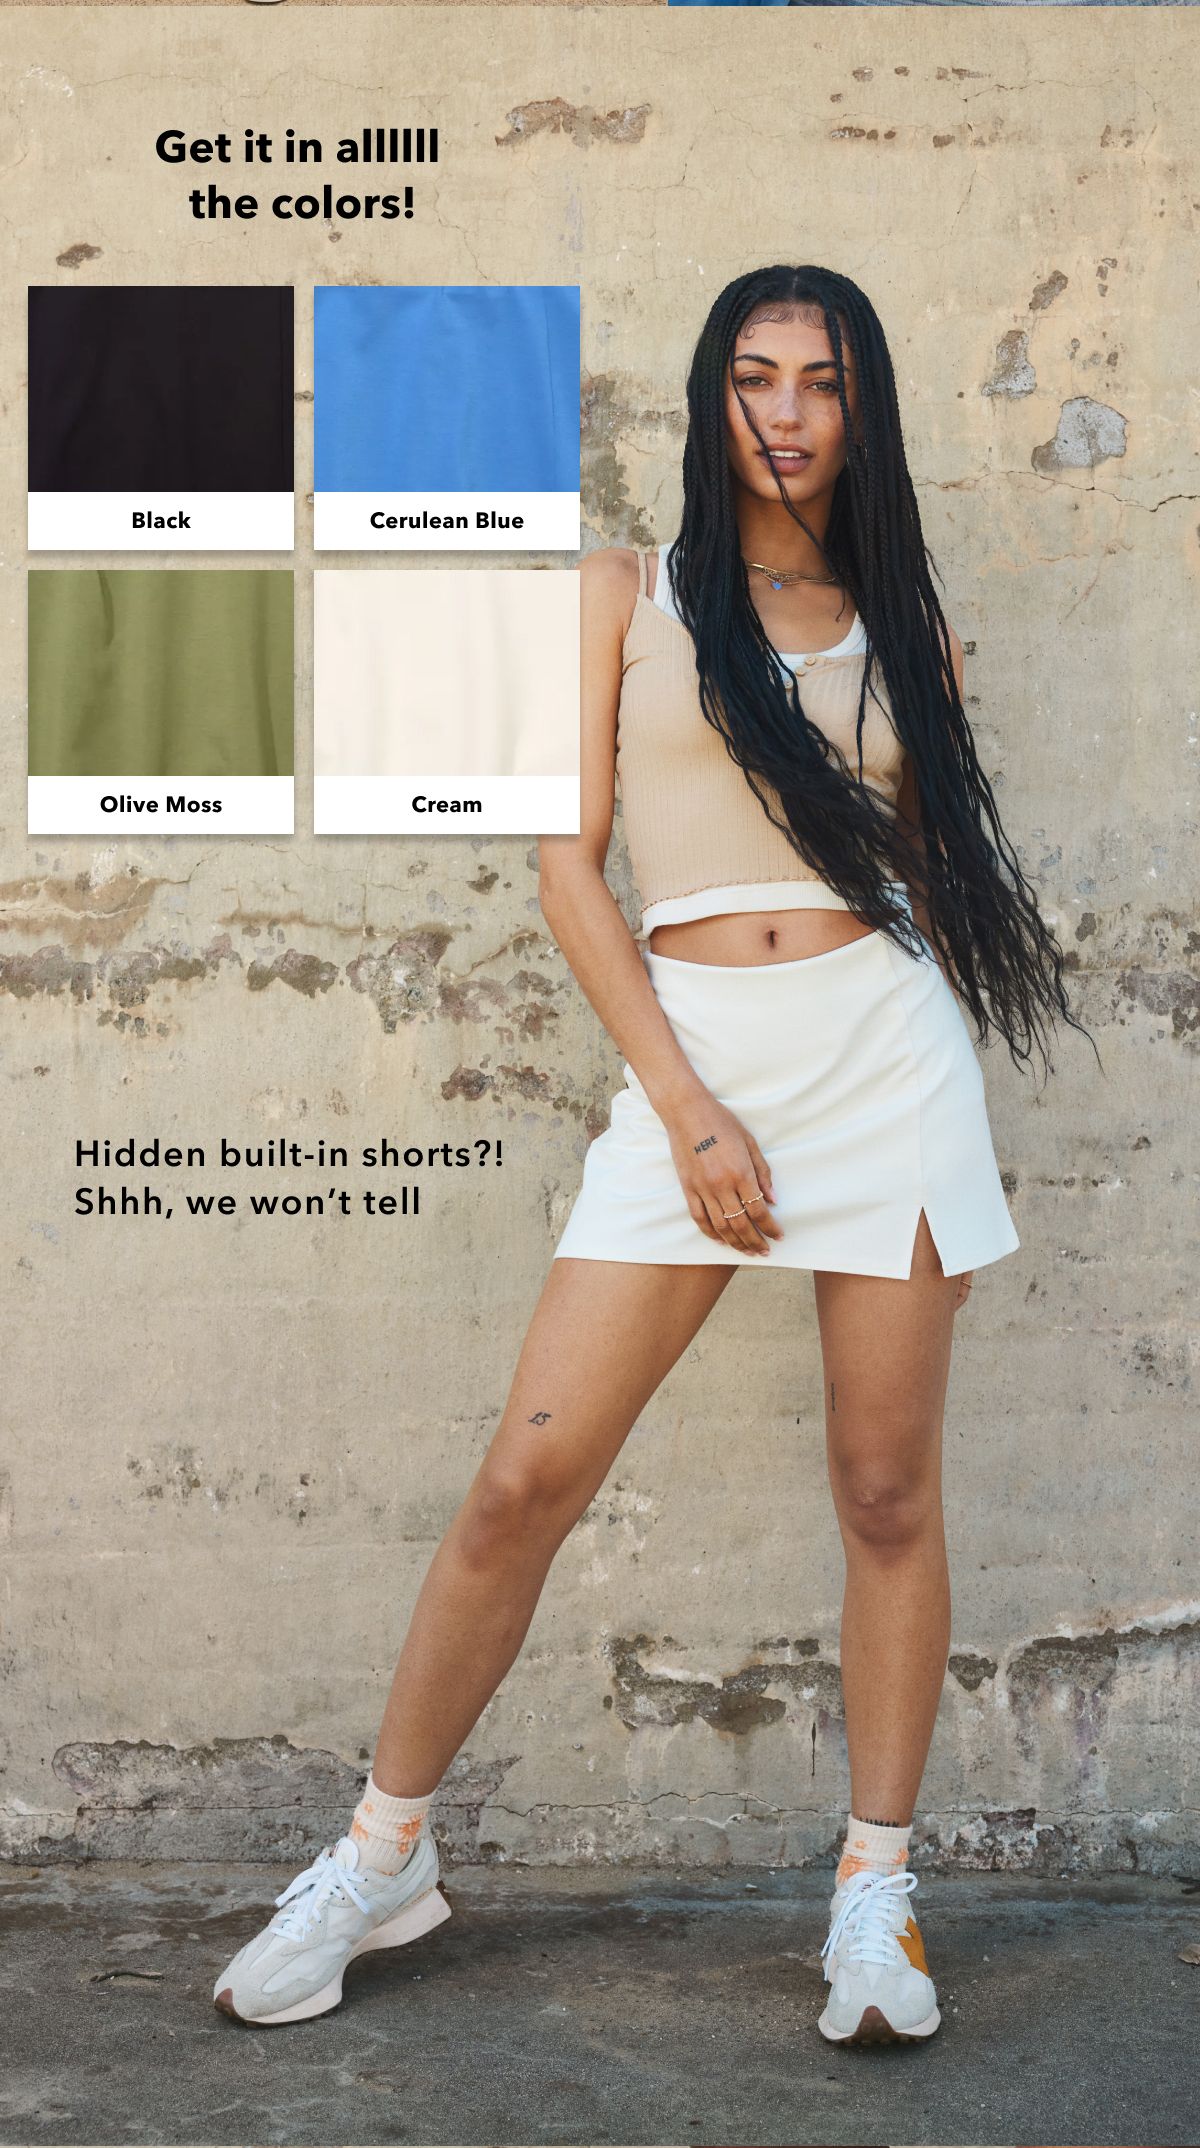 Get it in allllll the colors! Black | Cerulean Blue | Olive Moss | Cream | Hidden built-in shorts?! Shhh, we wont tell